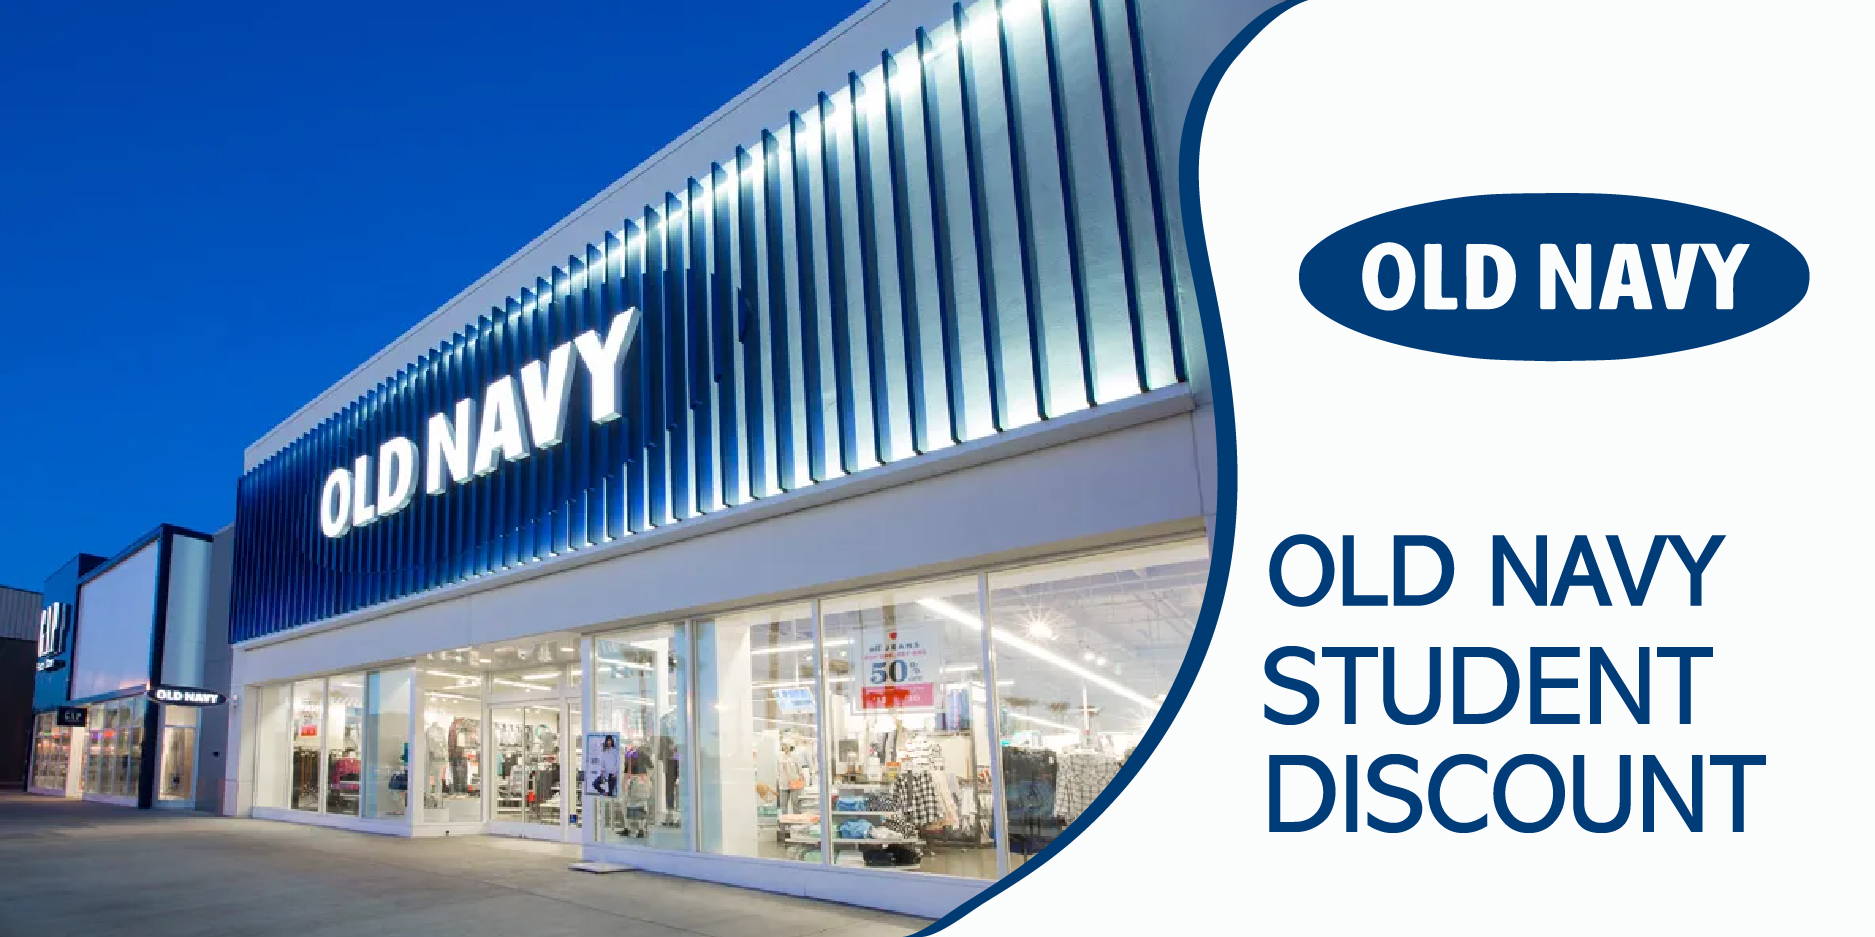 Old Navy Student Discount